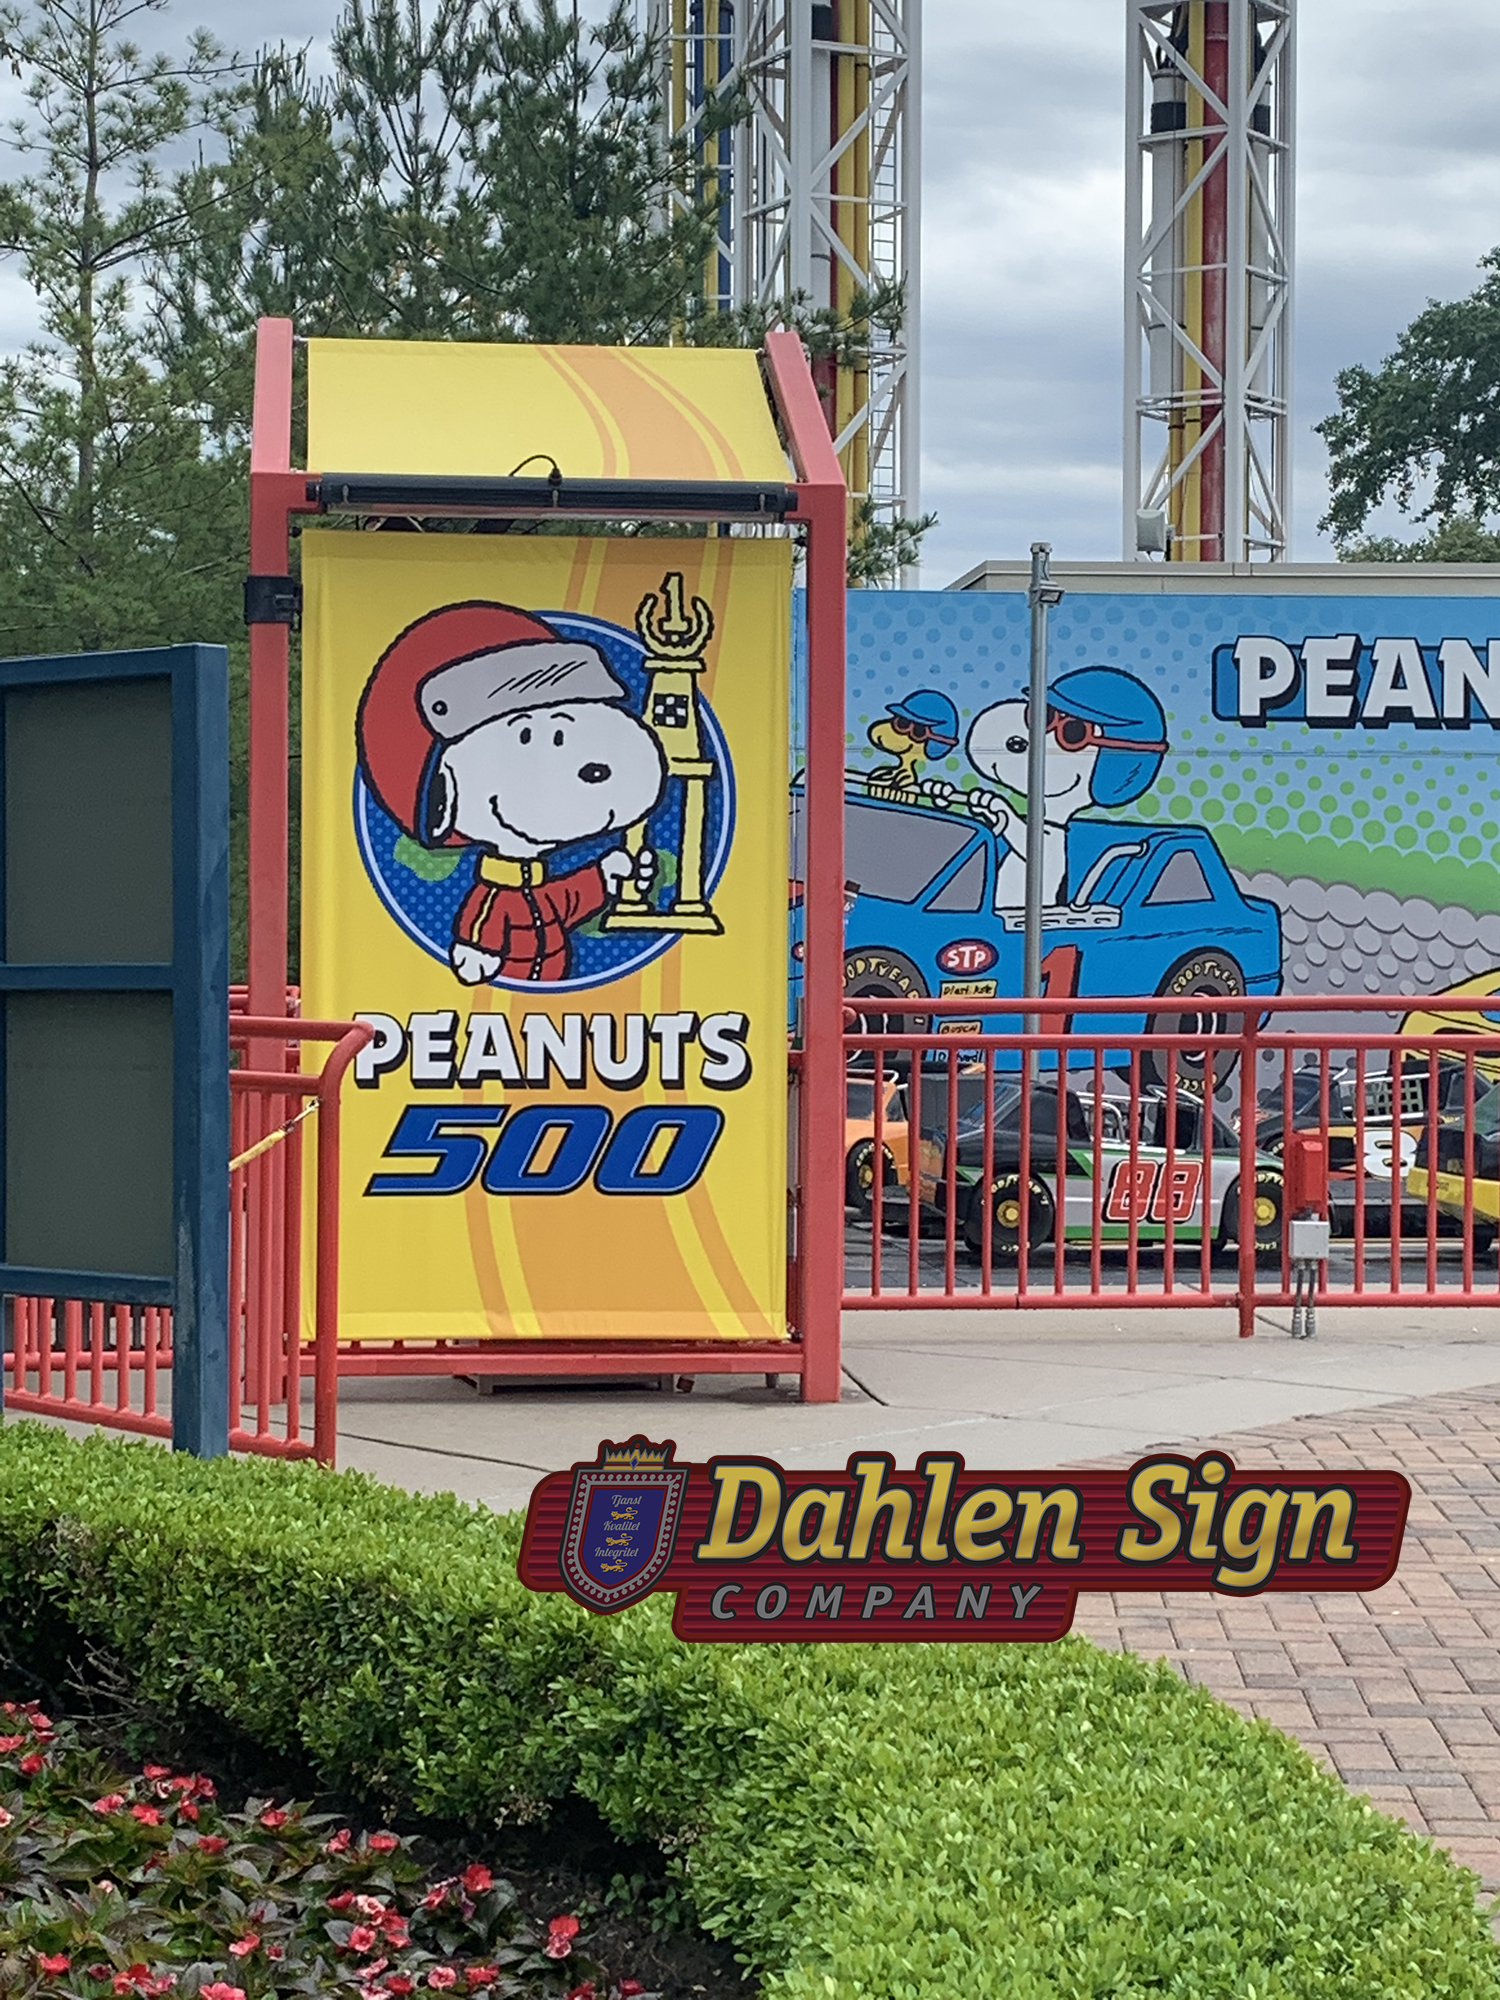 Valleyfair booth banners made by Dahlen Sign Company